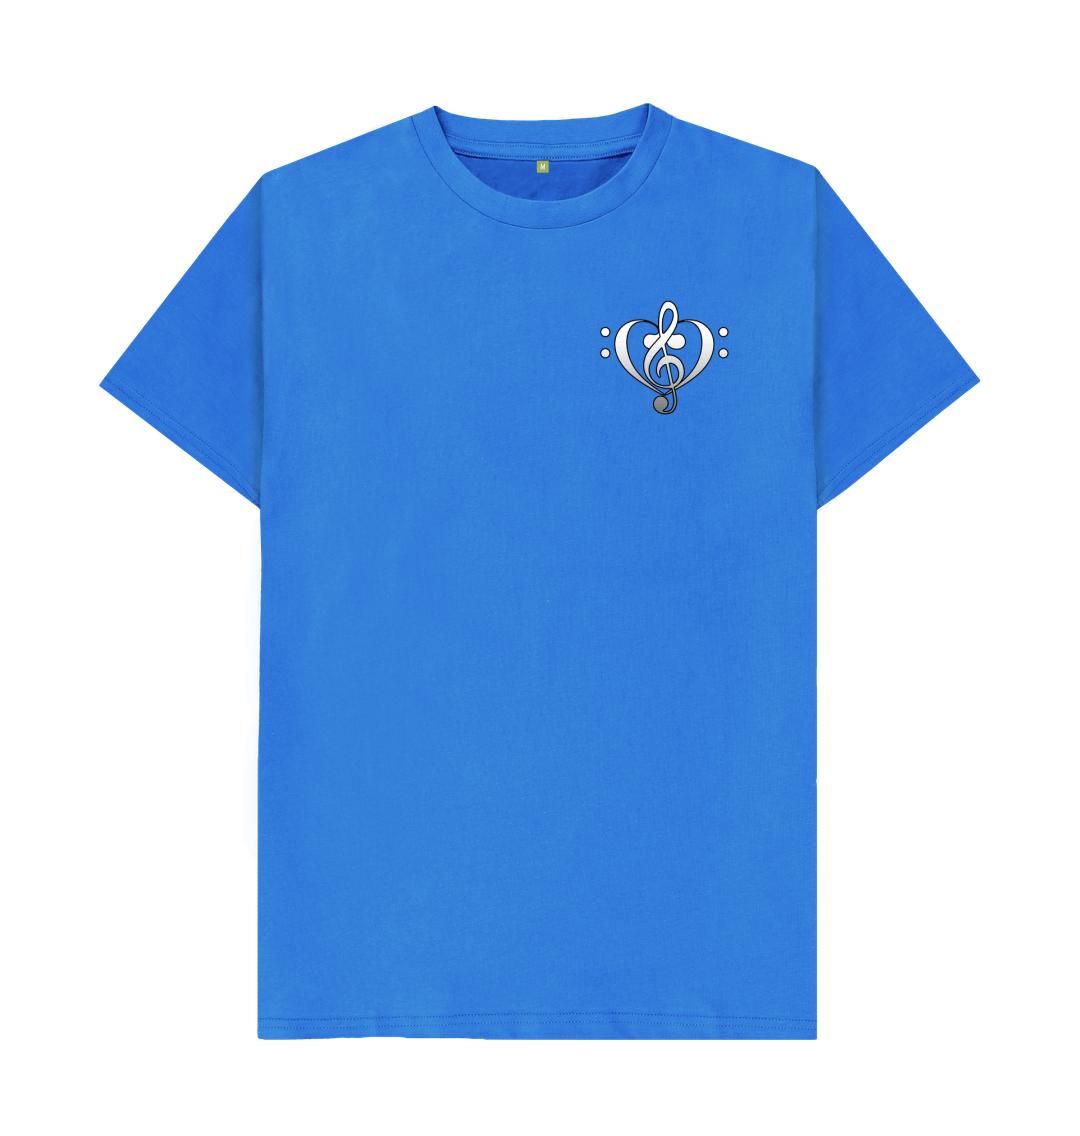 Bright Blue Combined Clef Heart Symbol Graphic Mens T-Shirt